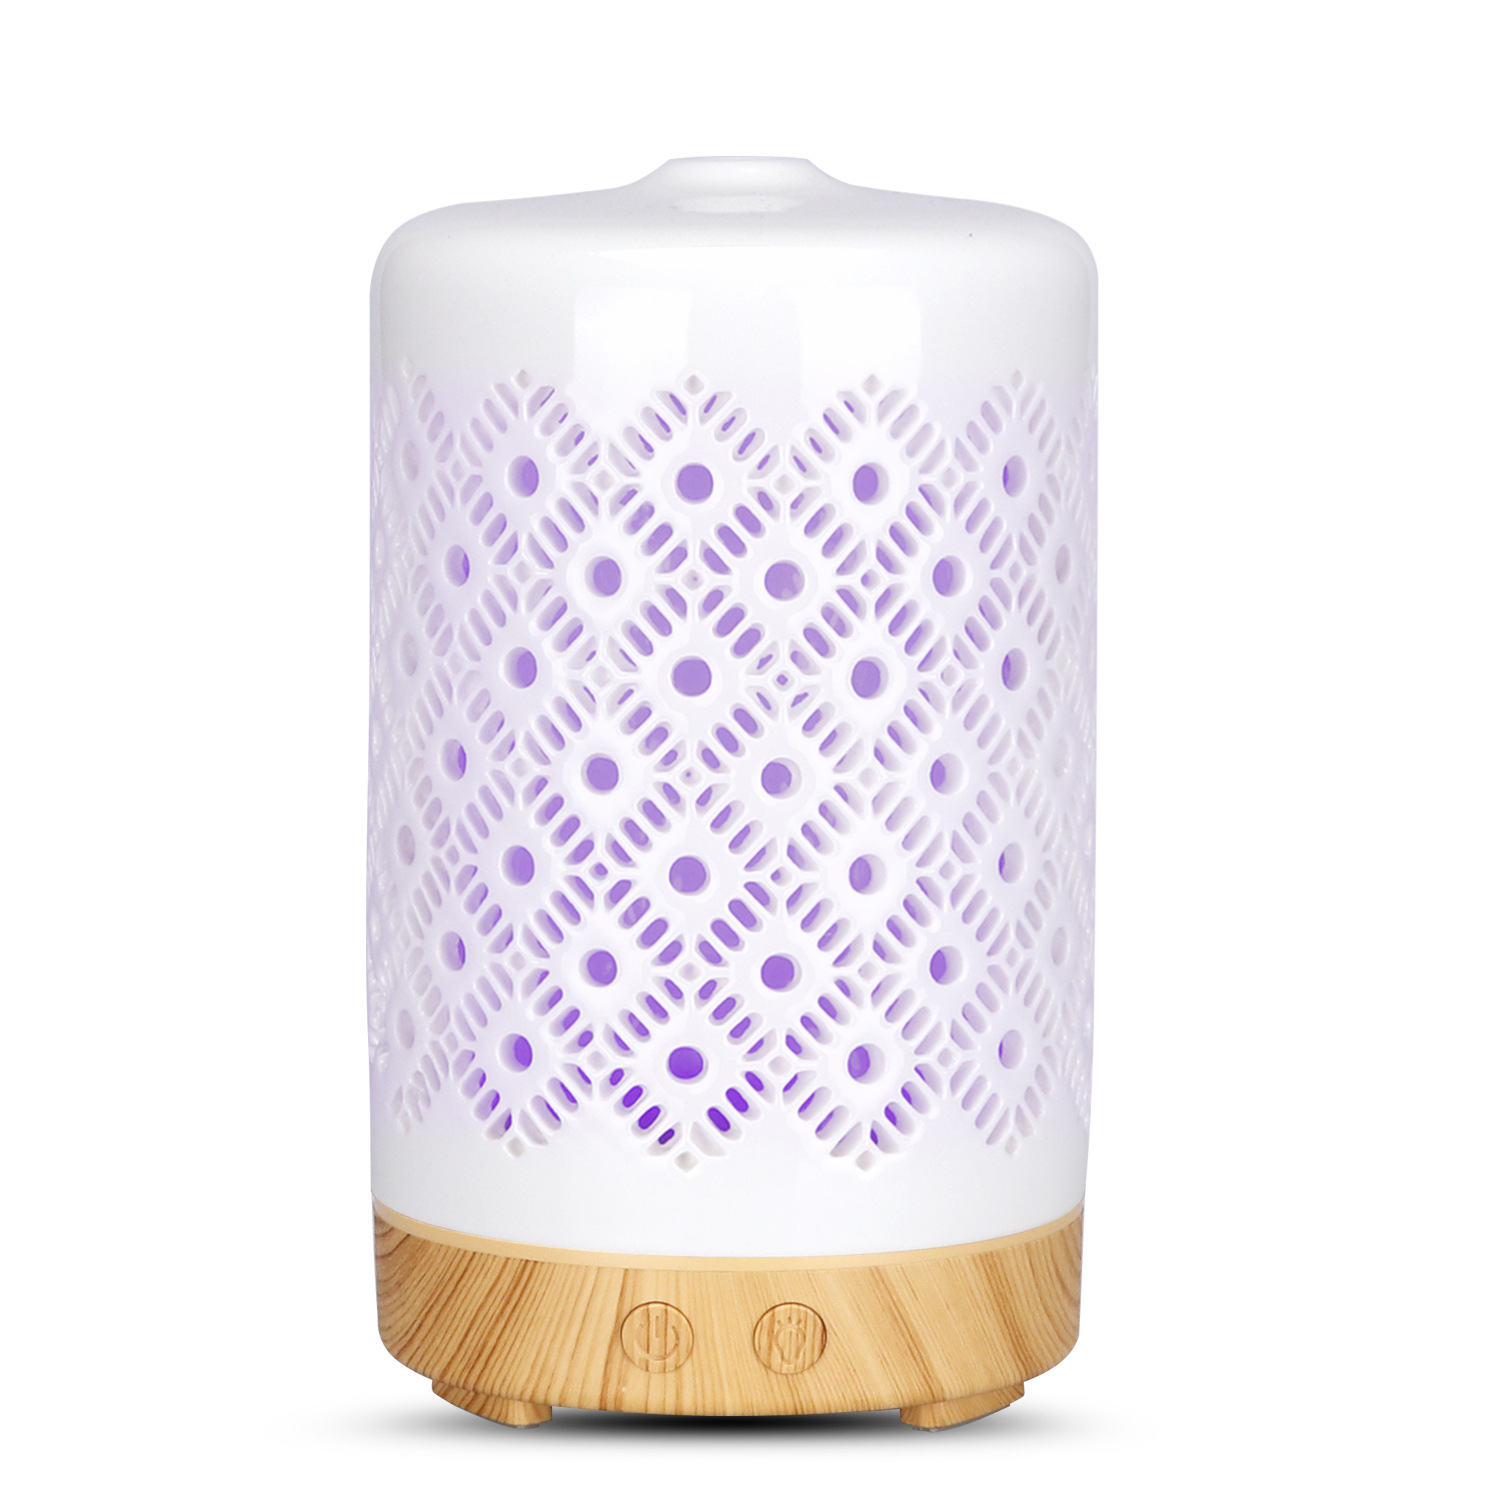 Professional Design China Circle Pattern Ultrasonic Cool Mist Essential Oil Diffuser 100ml Capacity Metal Aromatherapy Diffuser